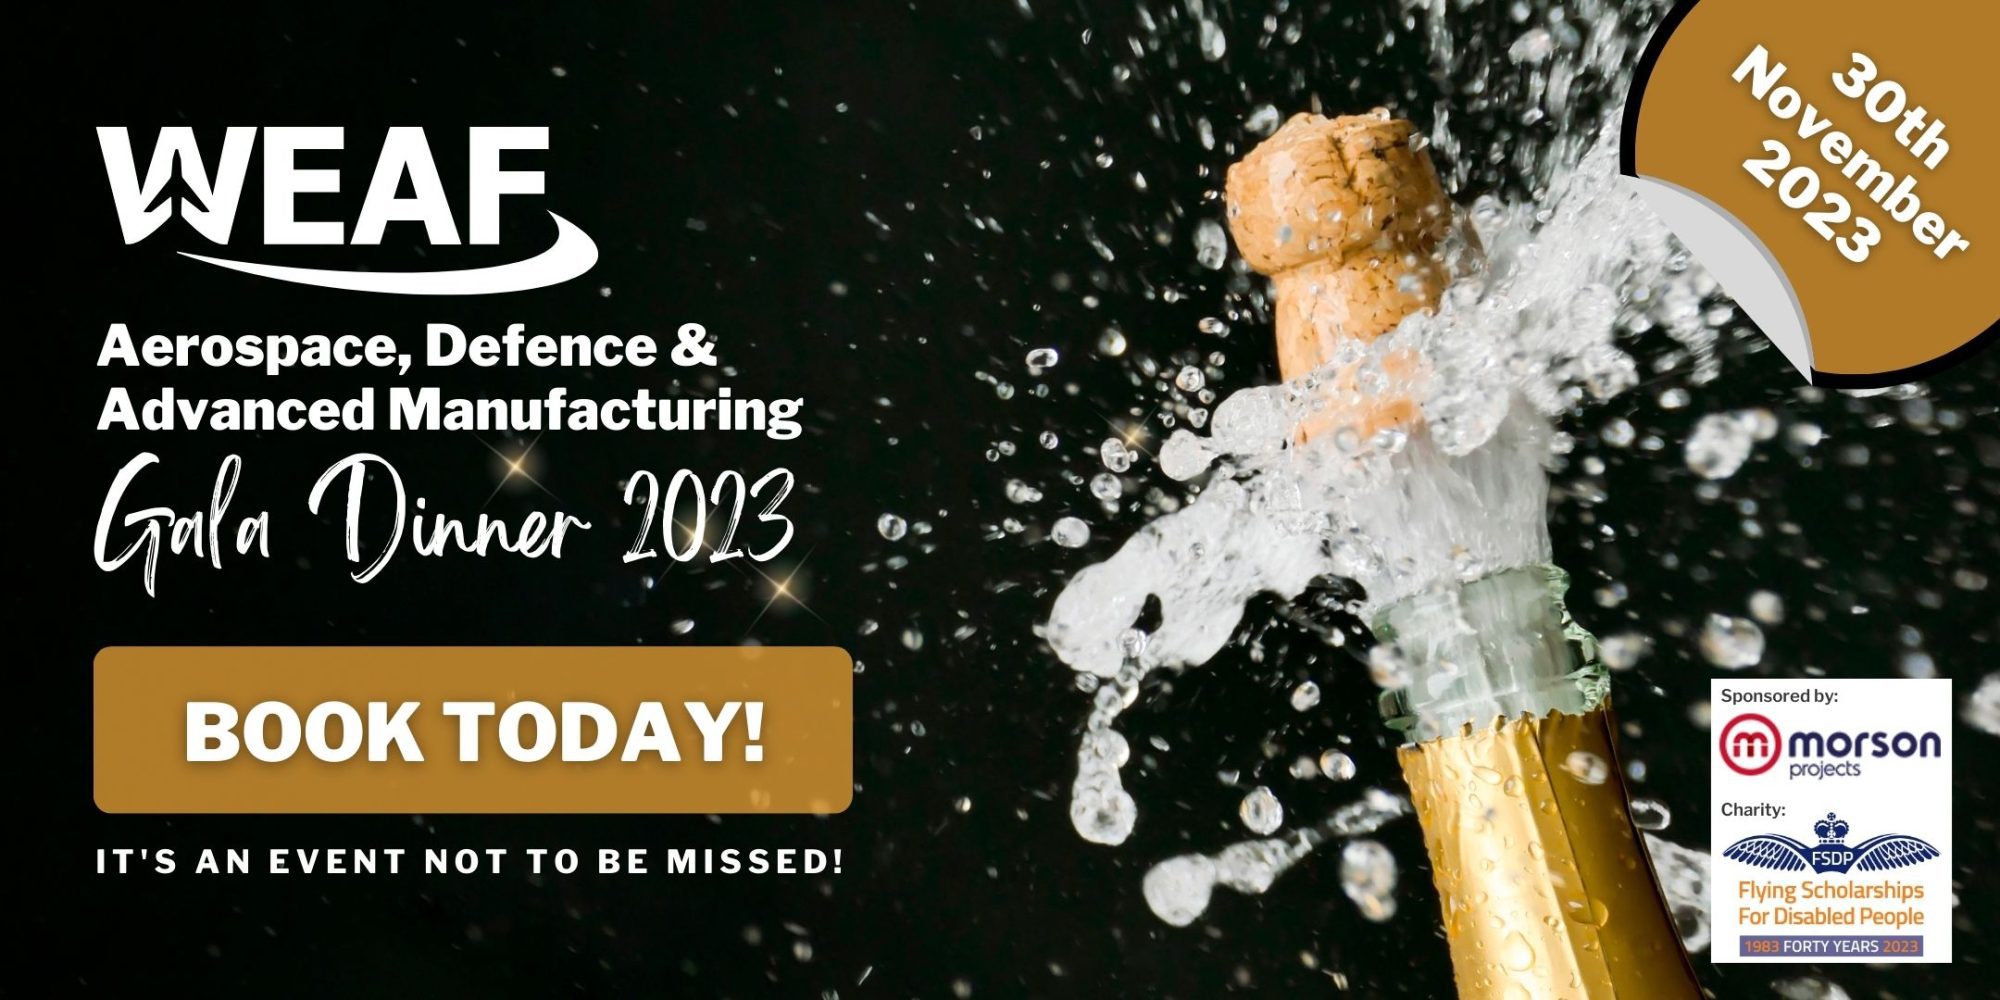 WEAF AEROSPACE, DEFENCE AND ADVANCED MANUFACTURING ANNUAL DINNER 2023